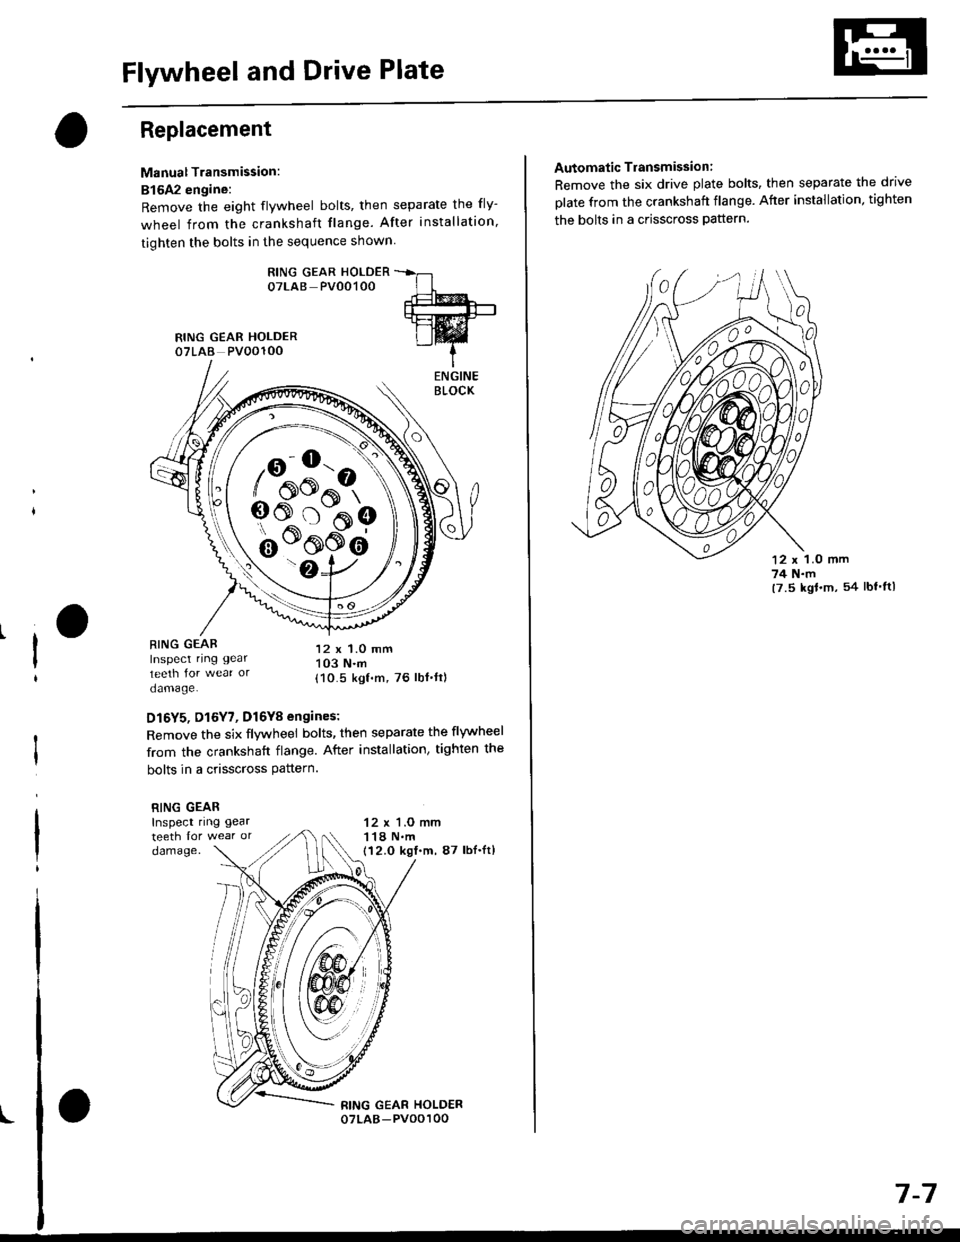 HONDA CIVIC 1996 6.G Workshop Manual Flywheel and Drive Plate
Replacement
Manual Transmission:
816A2 engine:
Remove the eight flywheel bolts, then separate the fly-
wheel from the crankshaft flange. After installation
tiohten the bolts 